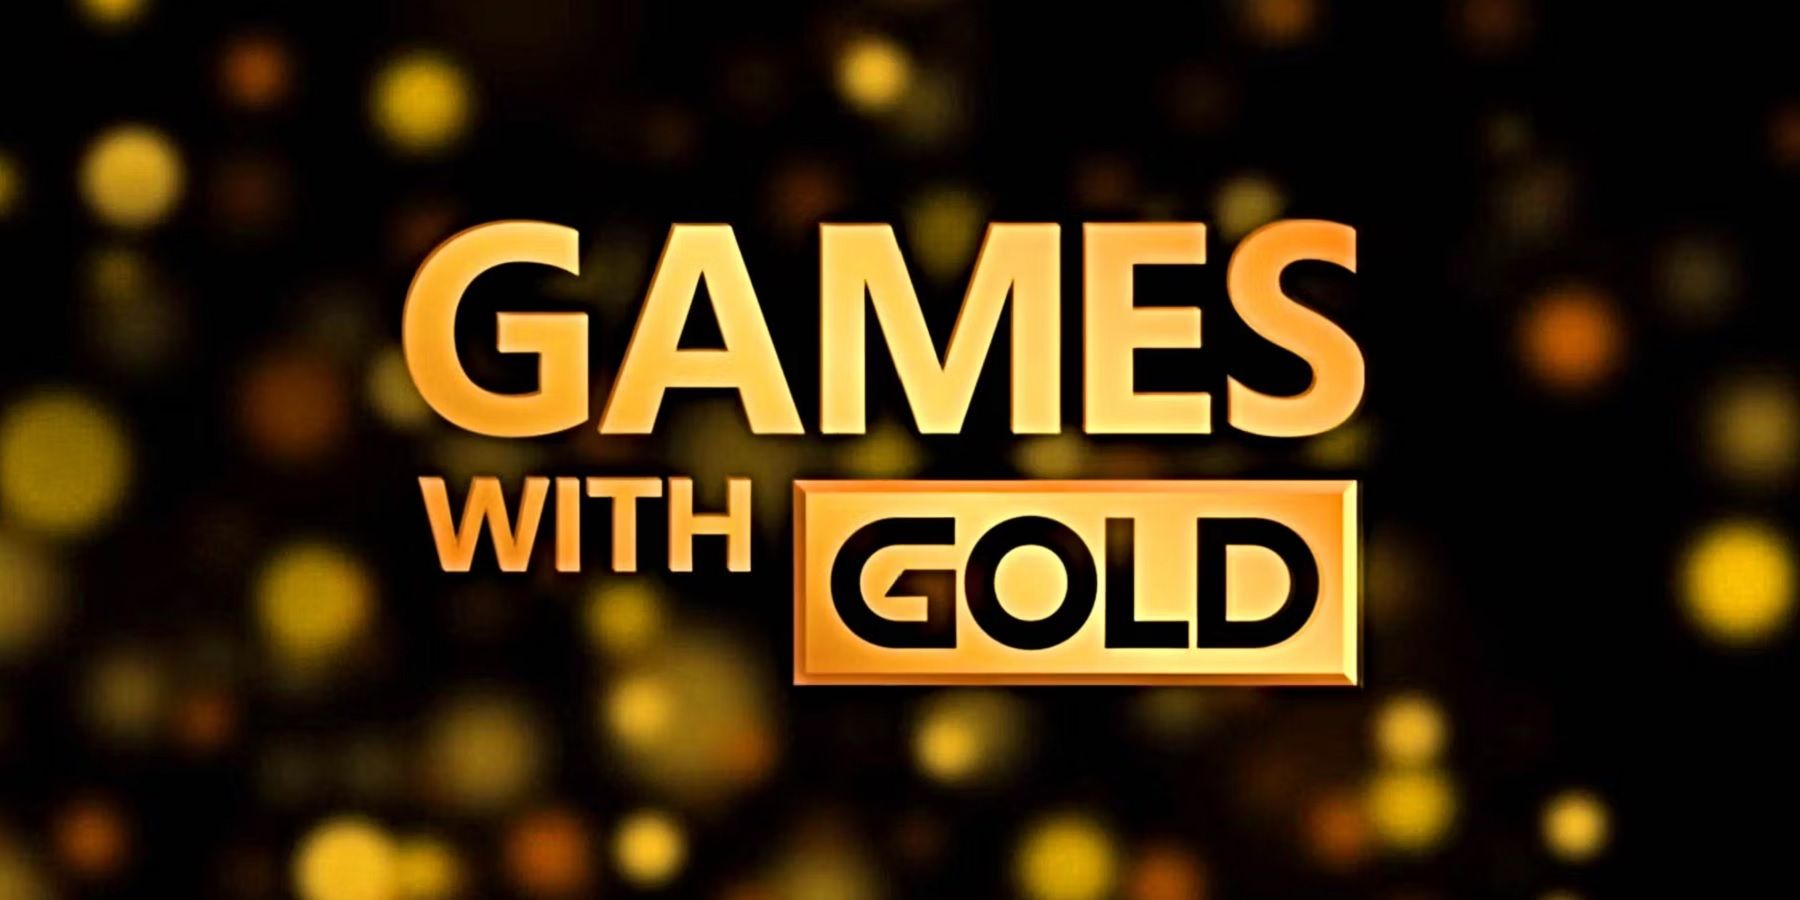 games with gold logo sparkle background